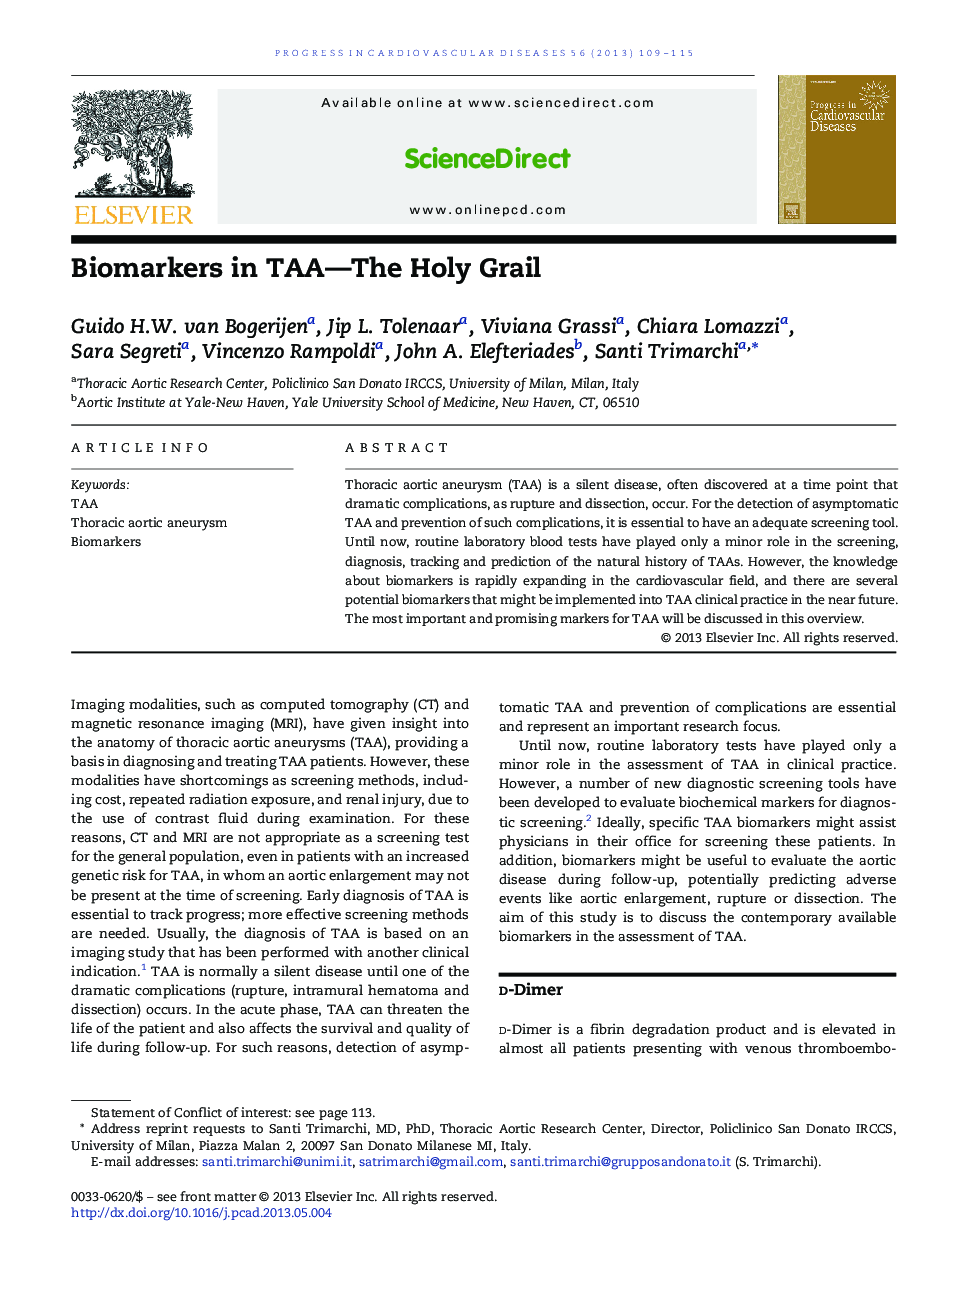 Biomarkers in TAA—The Holy Grail 